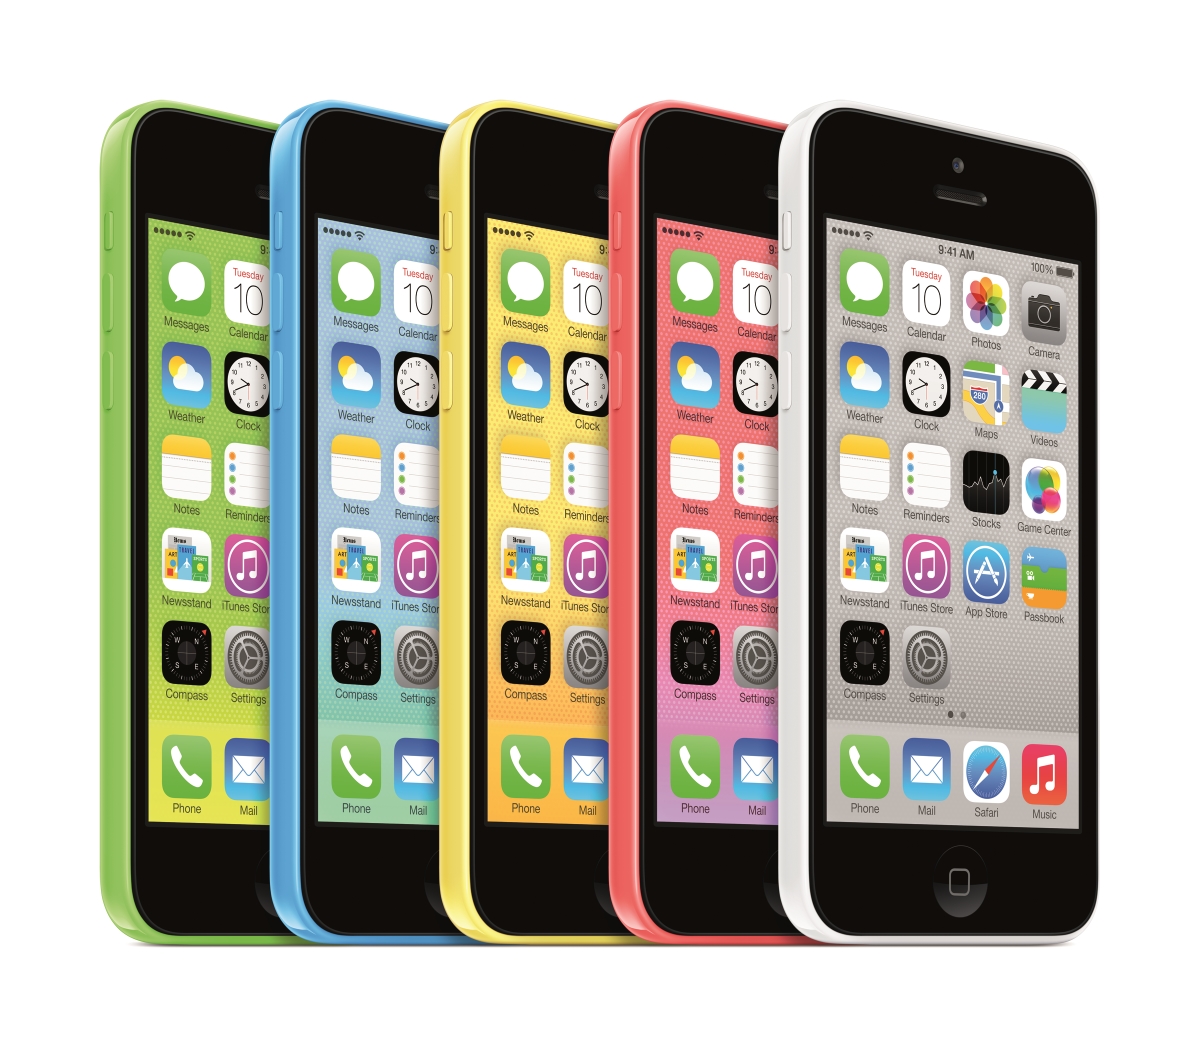 Cheaper 8GB iPhone 5C Launches in Europe